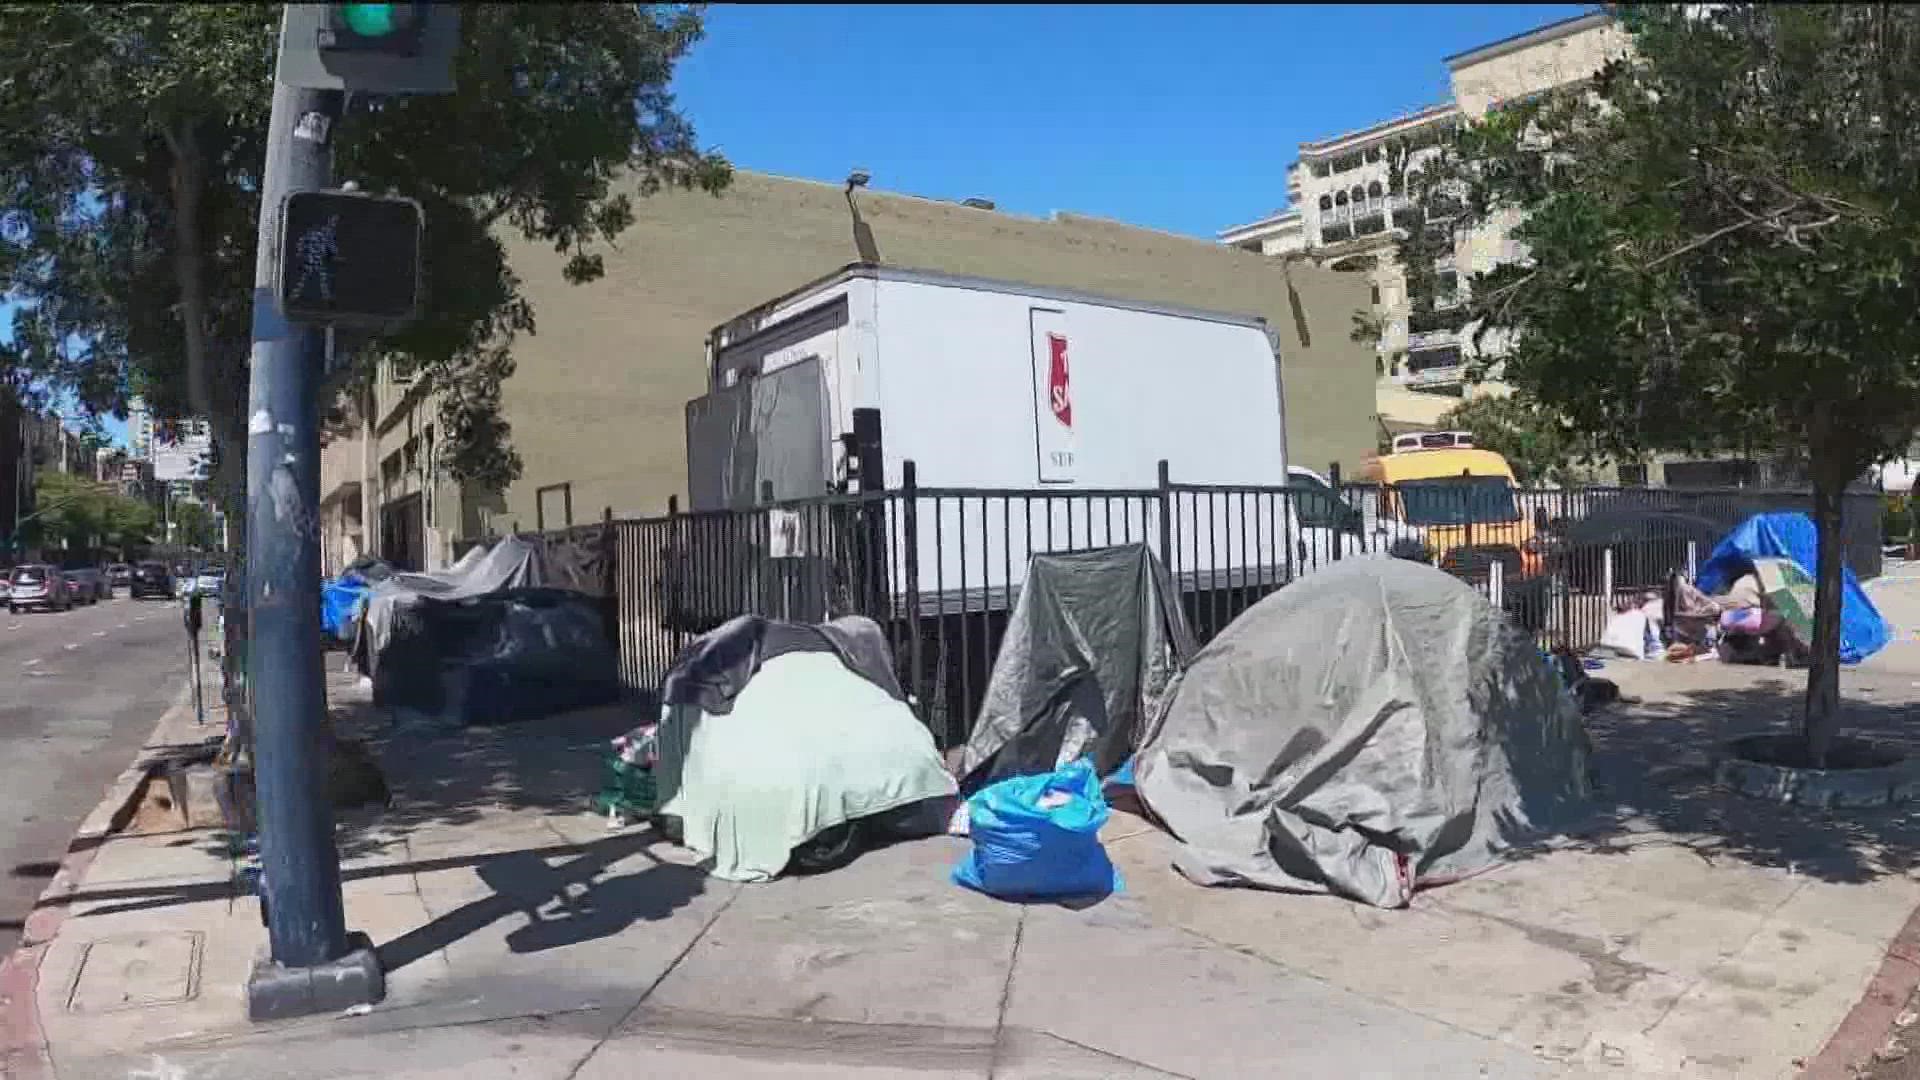 Mayor Gloria announces new efforts to solve San Diego's worsening homelessness crisis